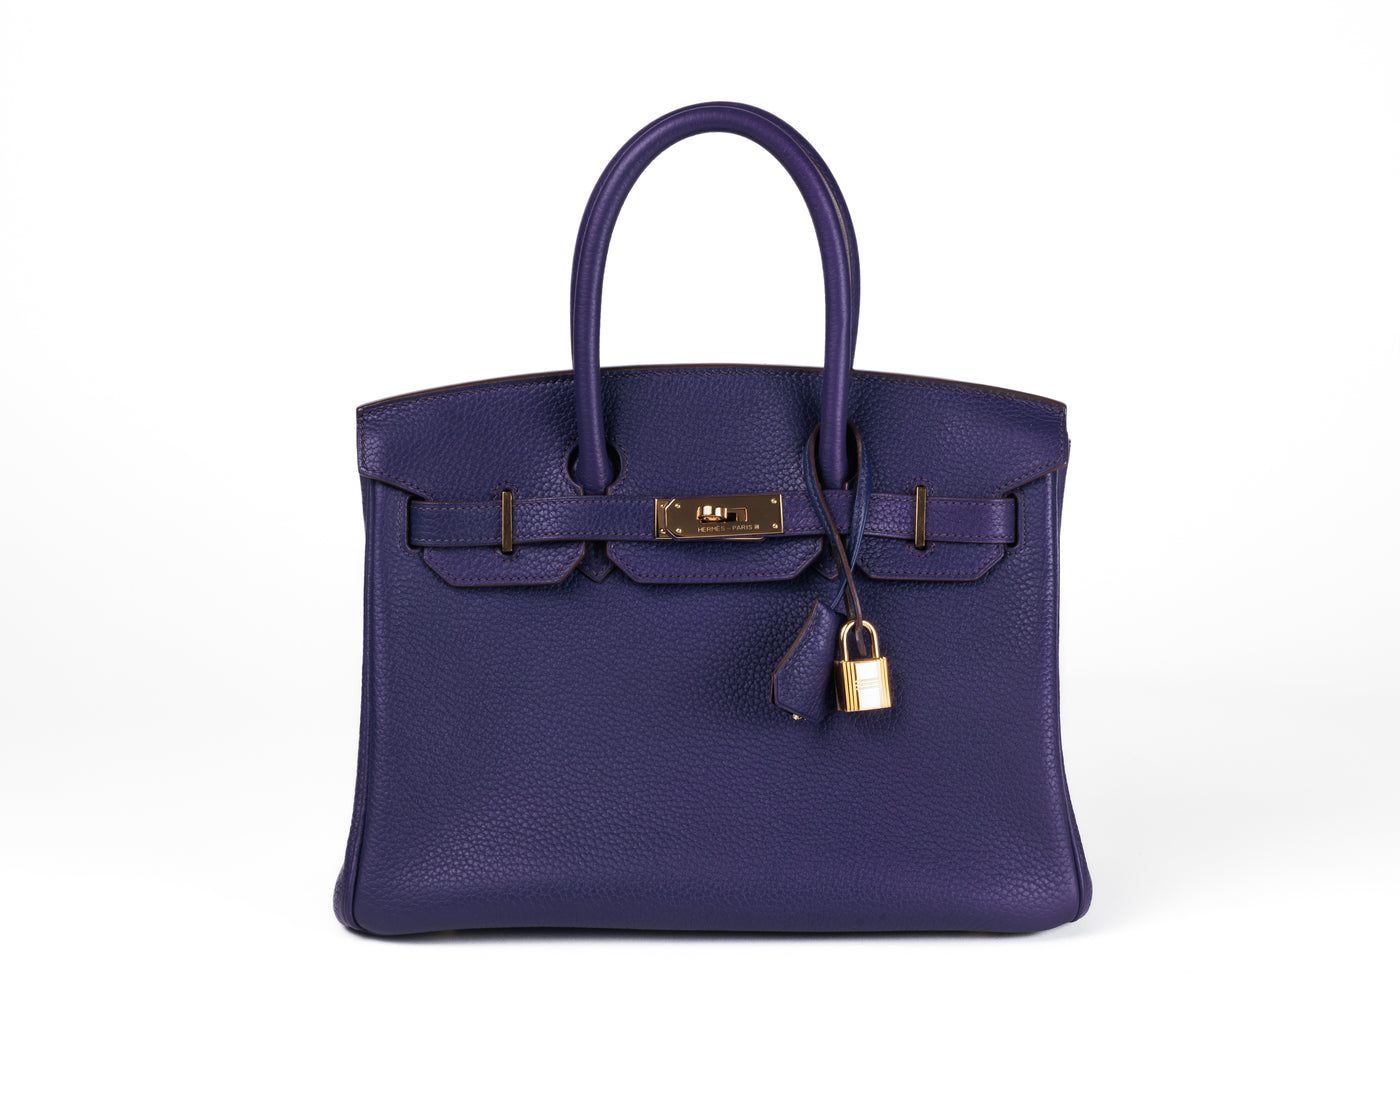 This exquisite Hermès 30 cm Purple Clemence Birkin is a luxurious addition to any collection, in excellent plus condition